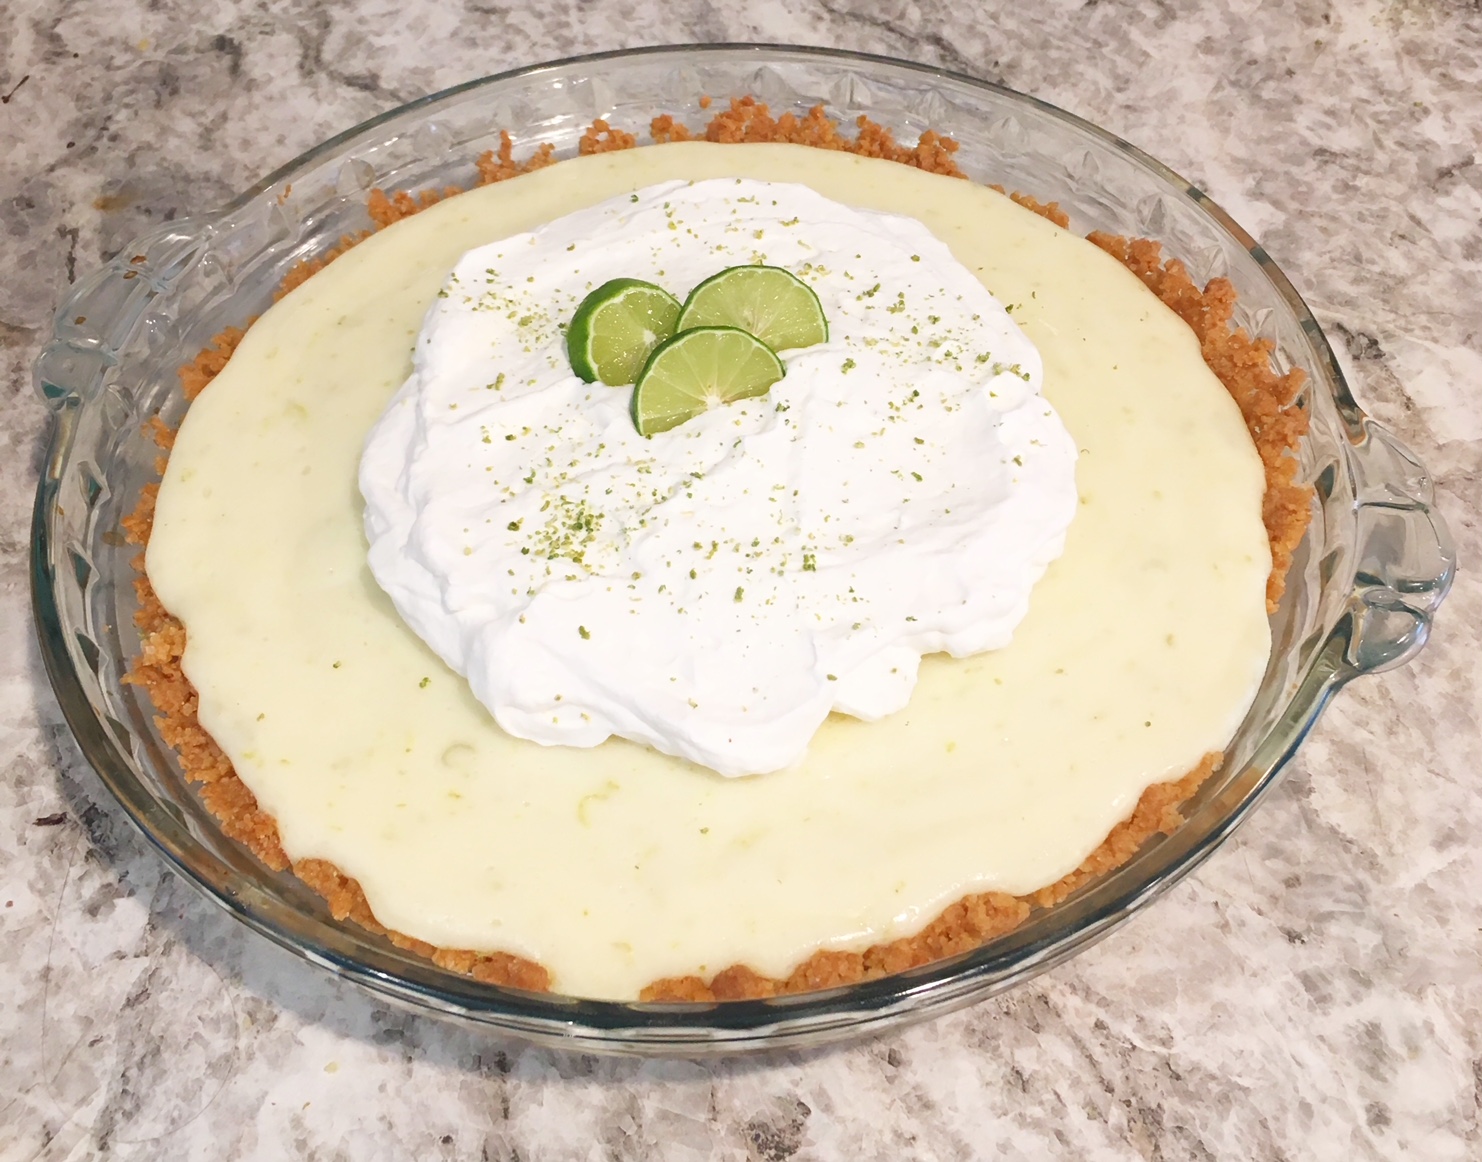 Summer is here and it's the perfect time to refresh yourself with this Key Lime Pie Dessert on 5DollarDinners!